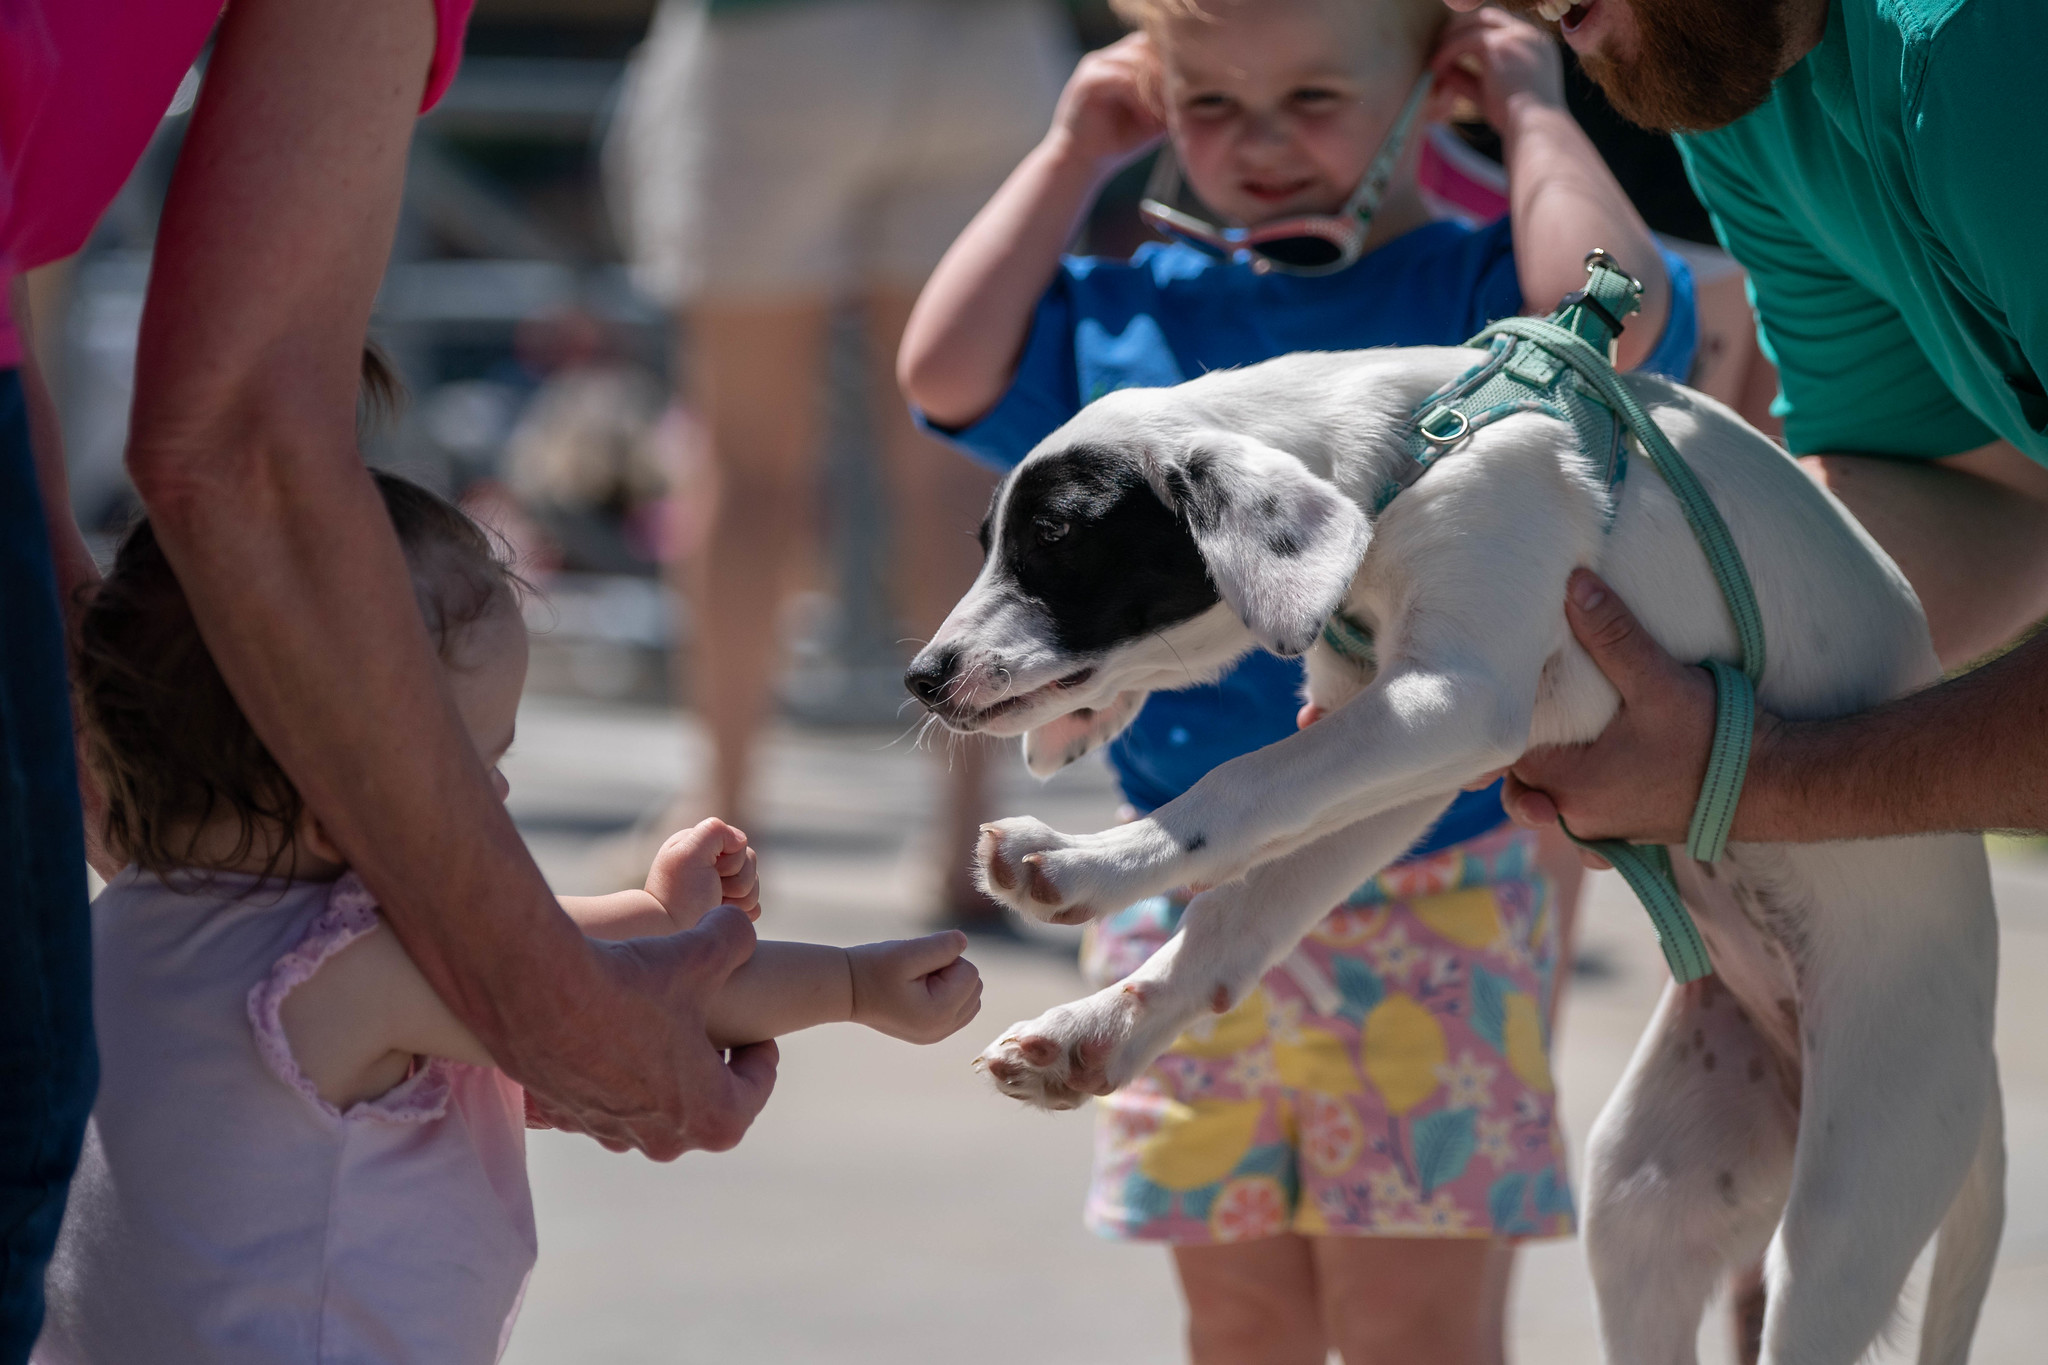 A puppy, held in the arms of a person who is mostly off-camera, reaches out its paws toward a toddler. The toddler is also reaching her hands out toward the puppy.